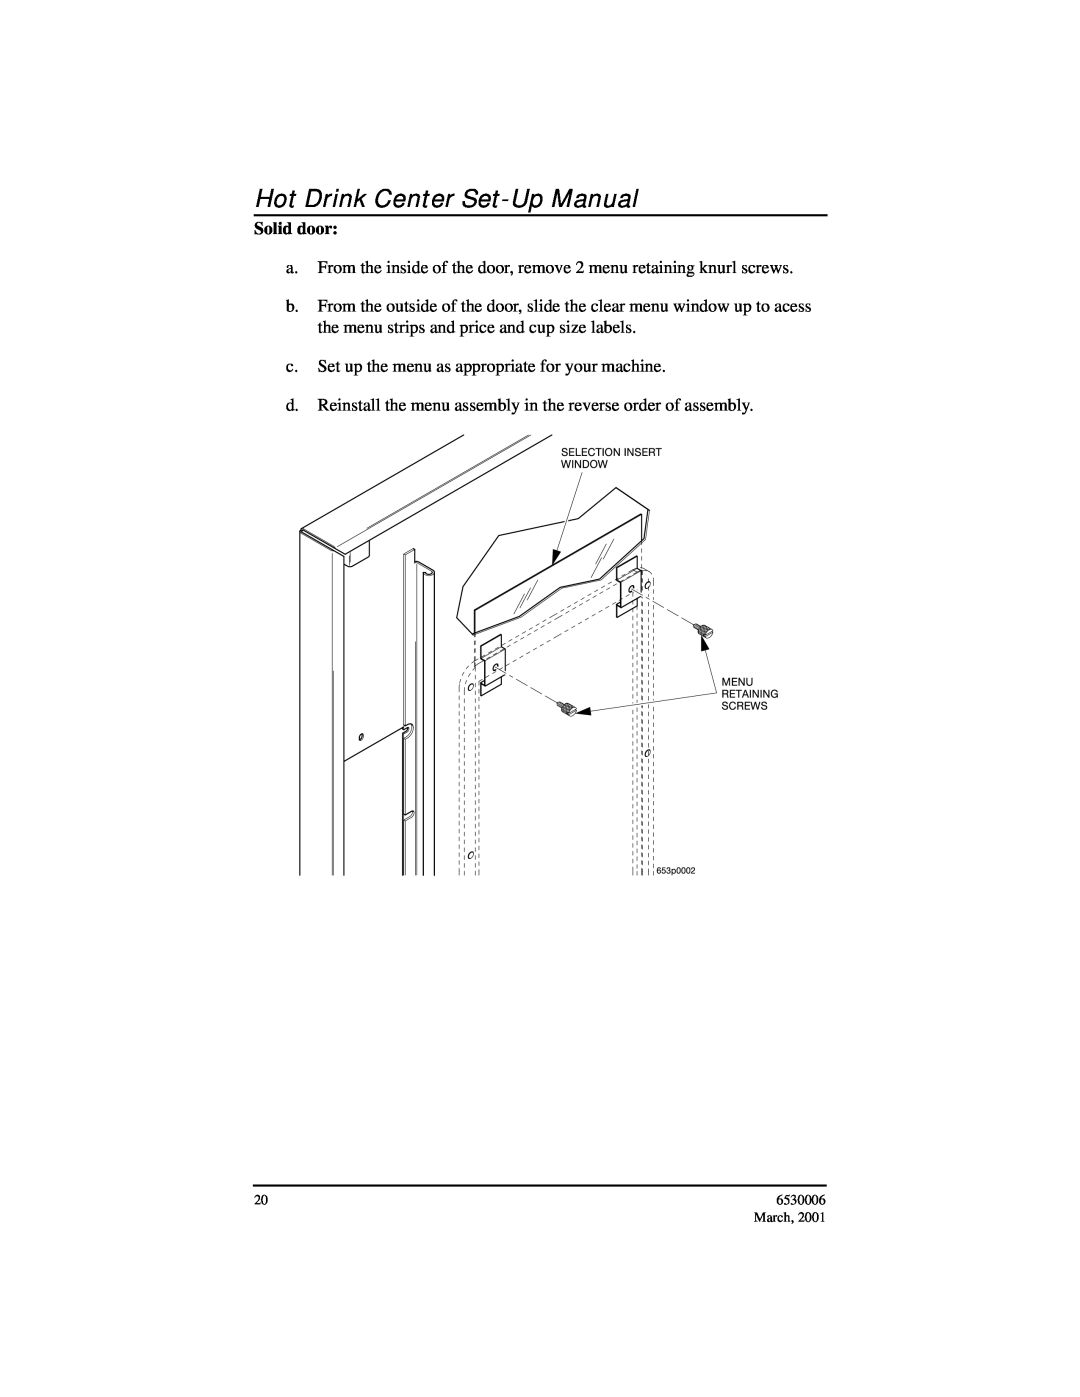 Crane Merchandising Systems manual Hot Drink Center Set-Up Manual, Solid door, 6530006, March 